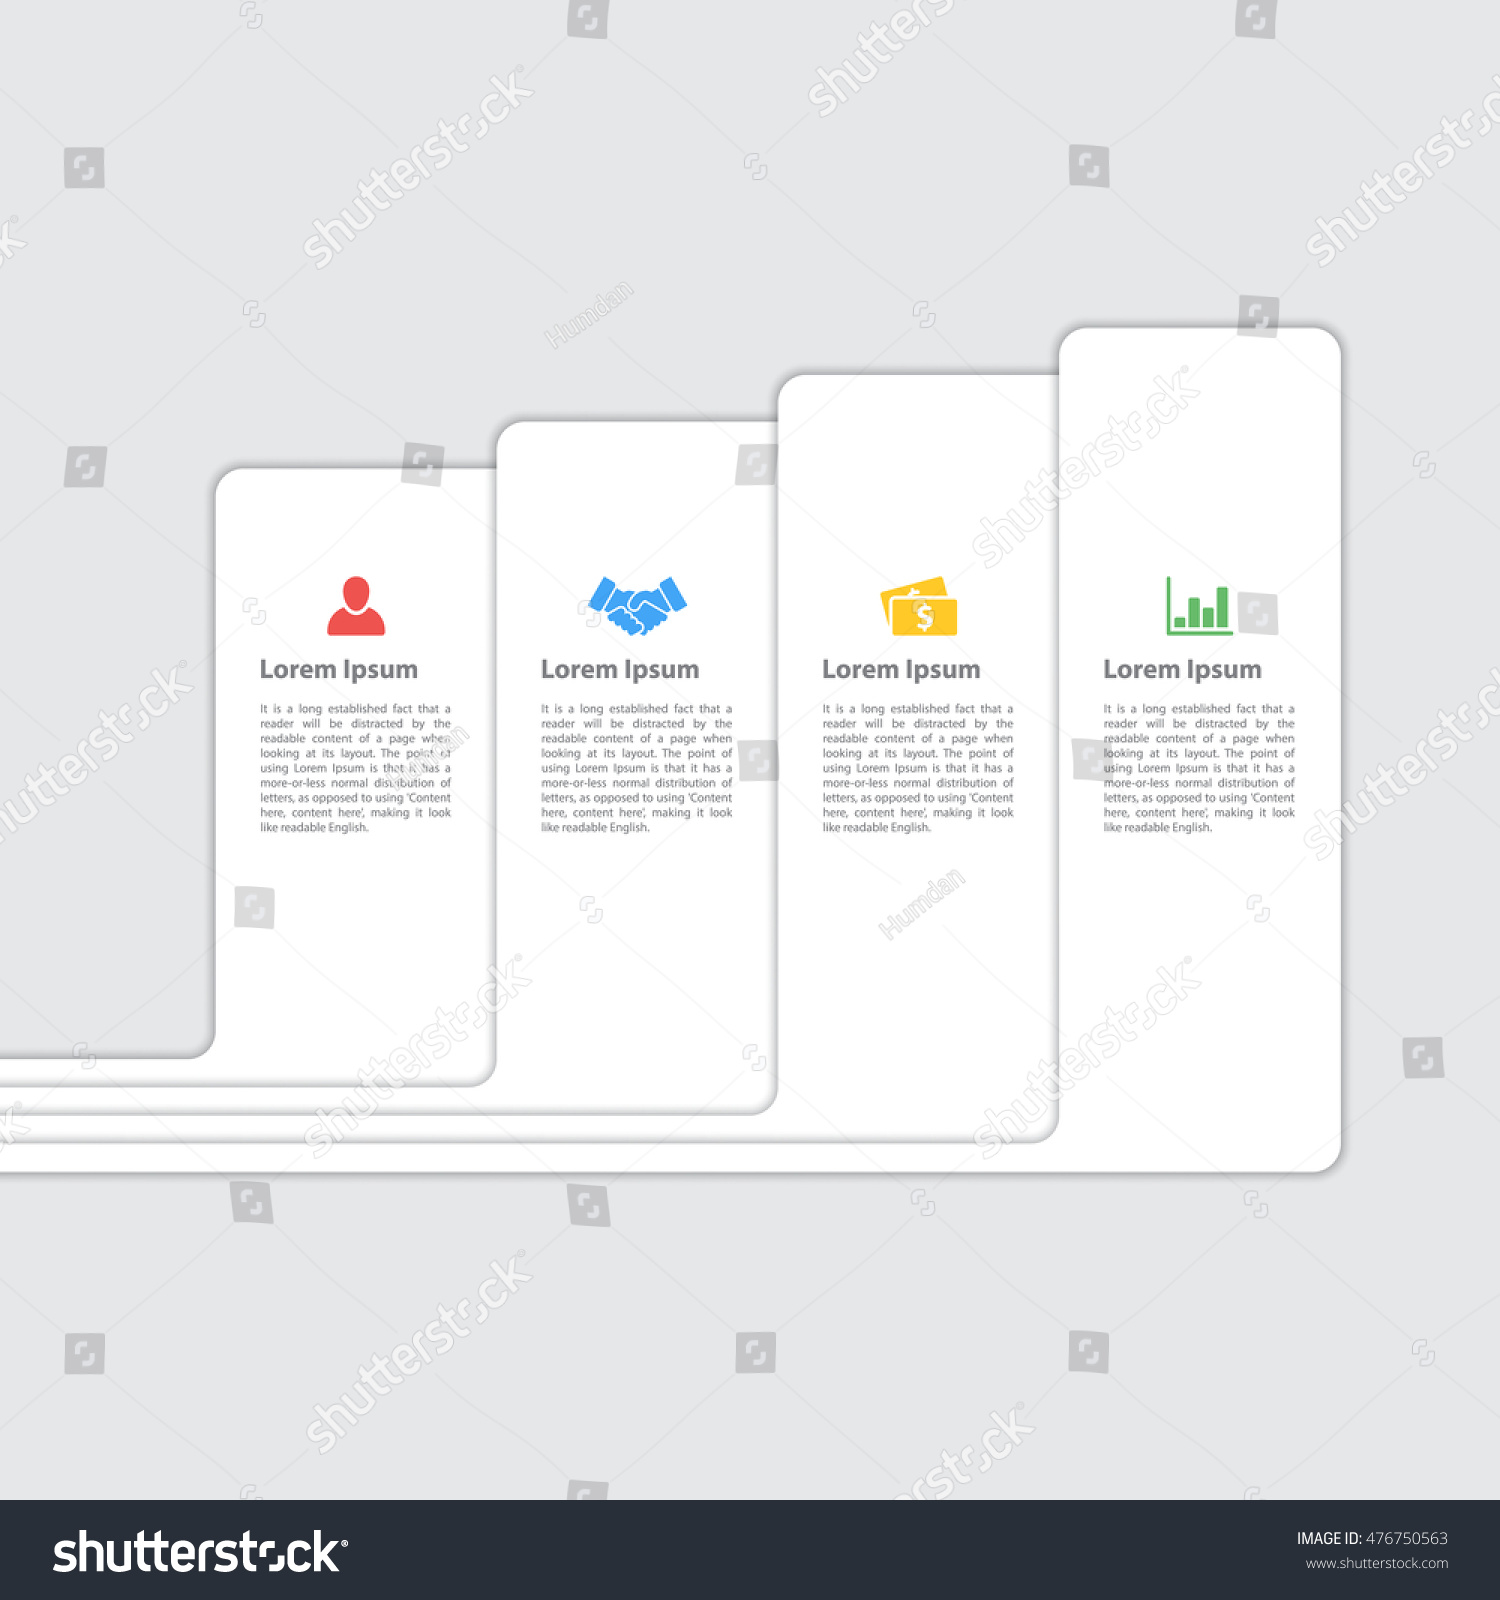 Four Steps Sequence Infographic Layout Concept Stock Vector Royalty Free 476750563 Shutterstock 9522